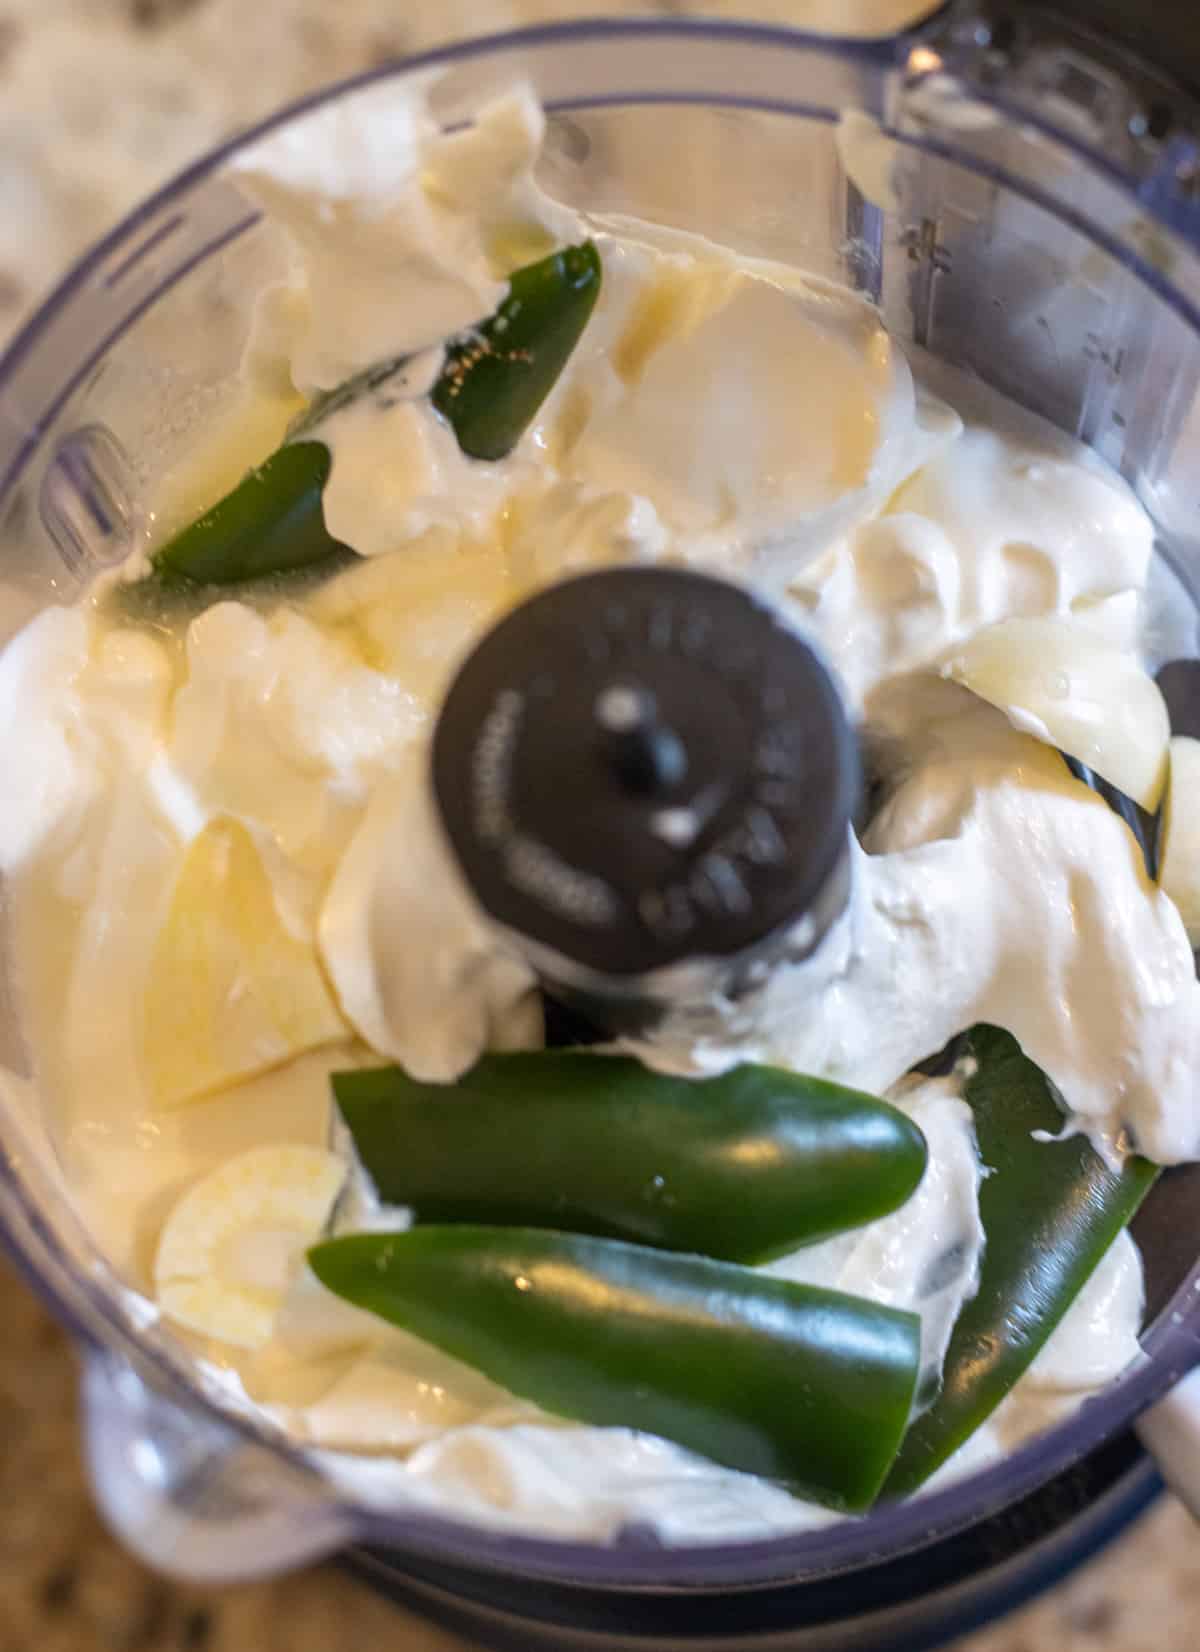 Sour cream, jalapeño, garlic clove, salt, and lime juice in a food processor ready to blend.